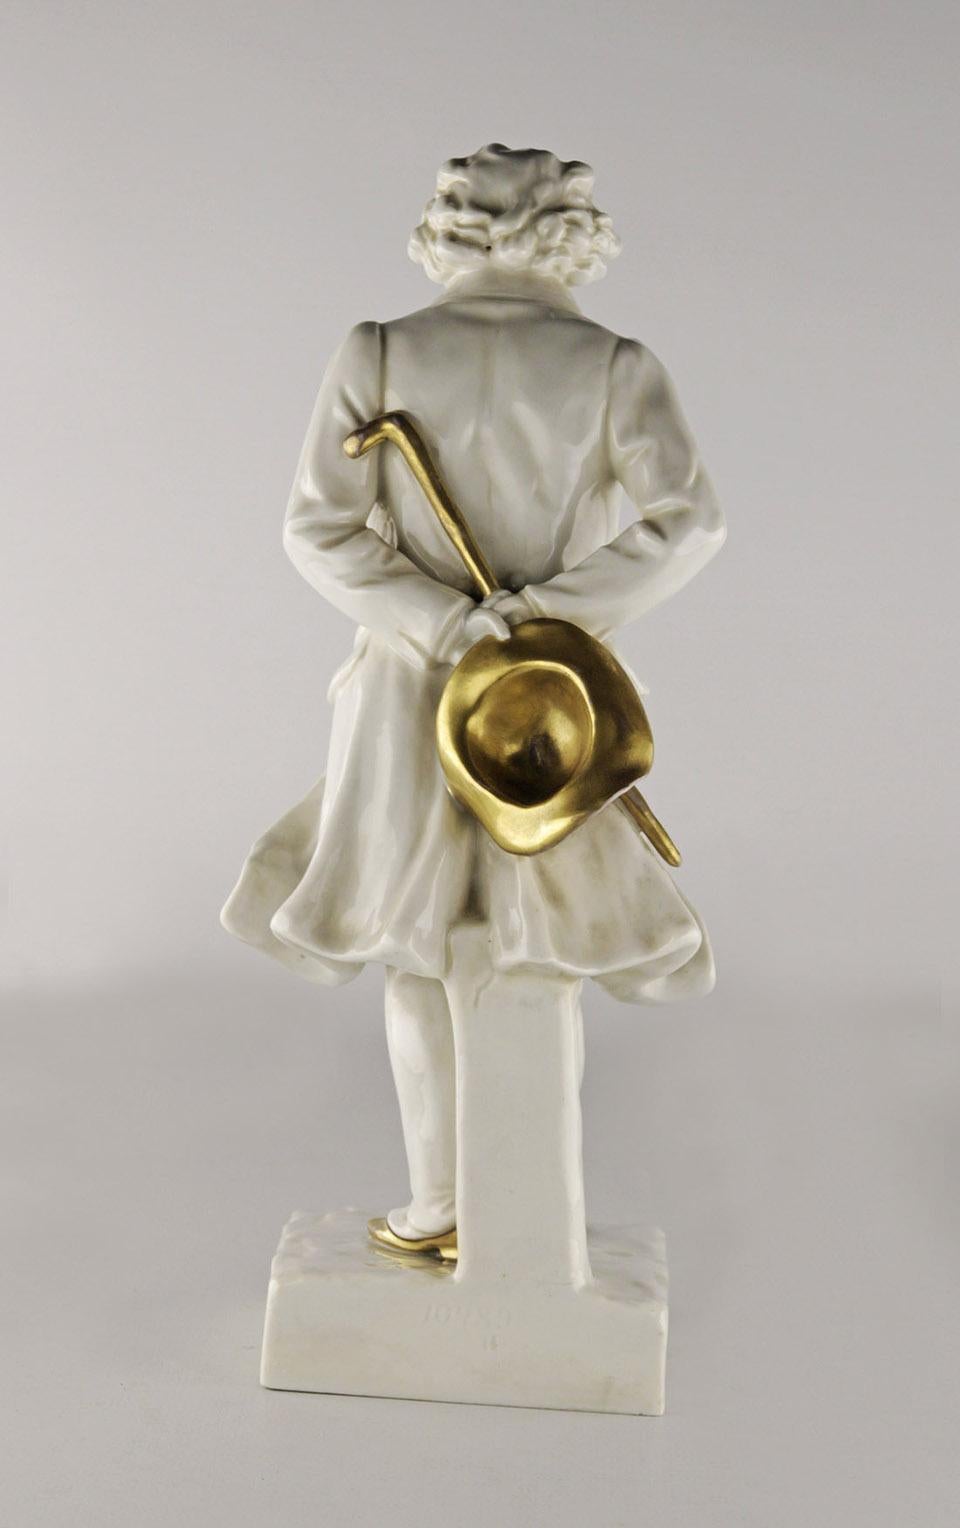 Pressed Early 20th C. French Glazed and Gilt Porcelain Beethoven Sculpture with Base